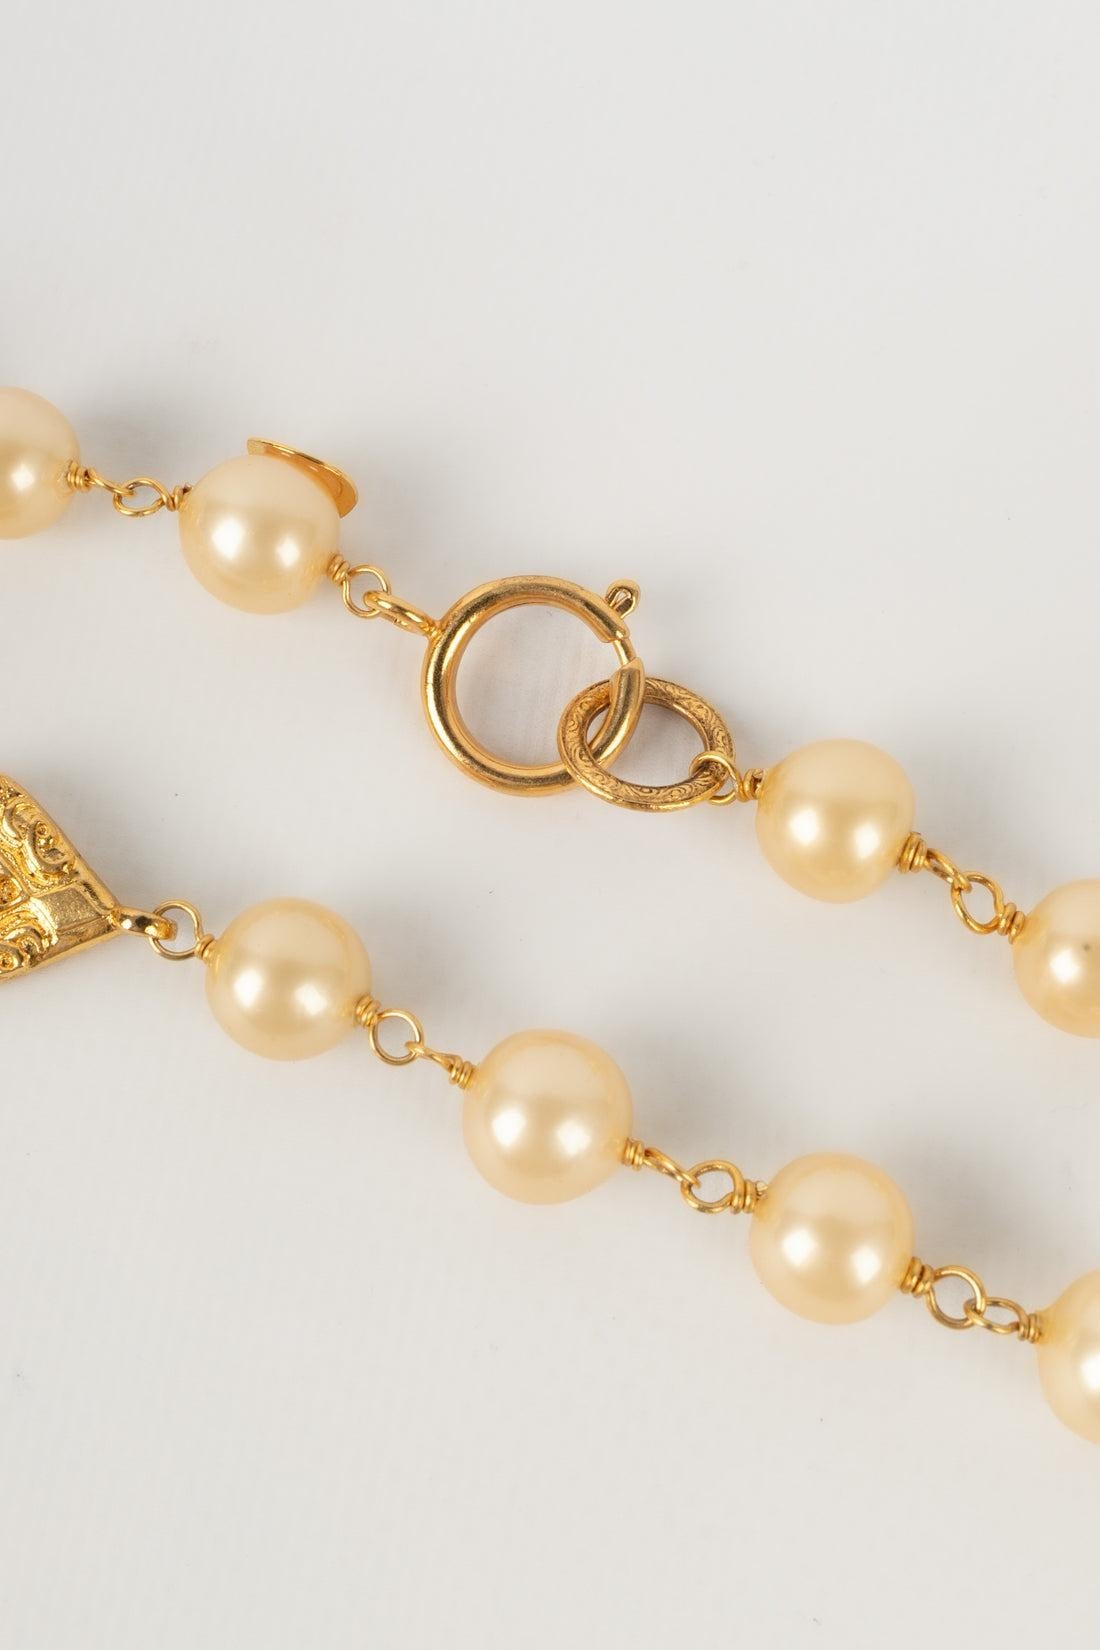 Chanel Costume Pearls Necklace 1